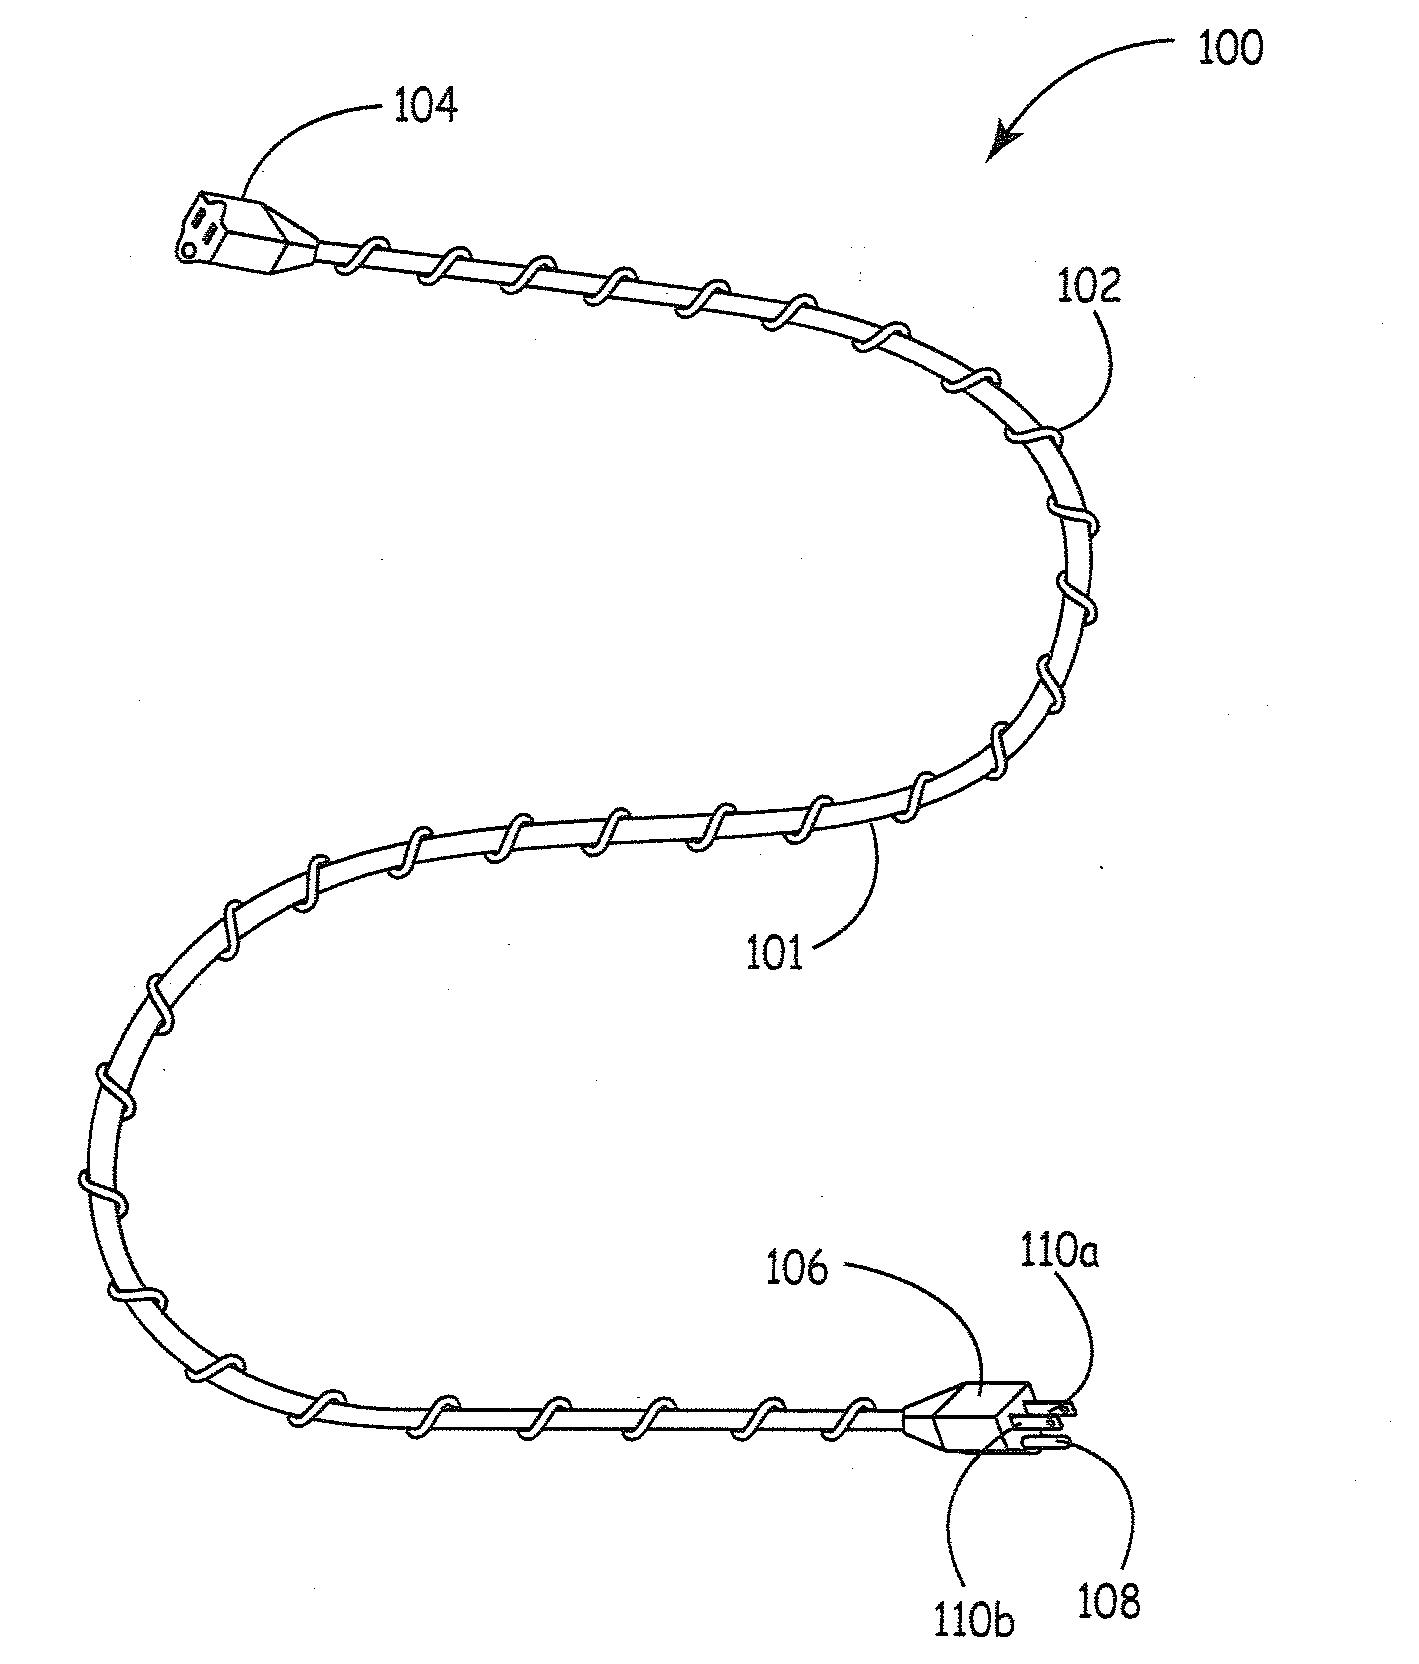 Tangle resistant flexible elongated device